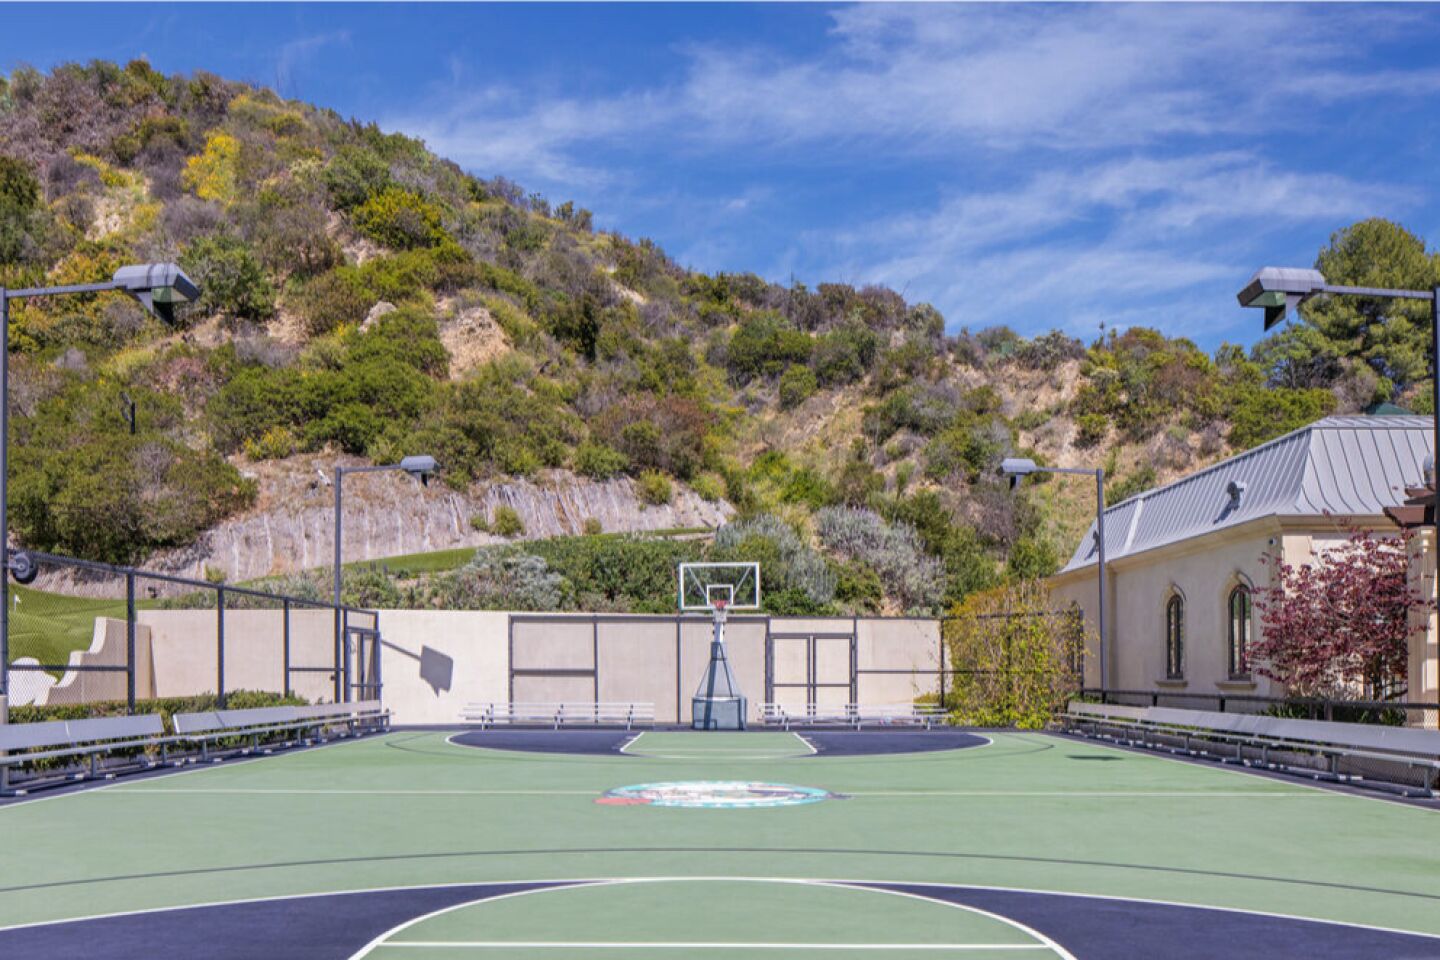 The basketball court with a hill in the background.